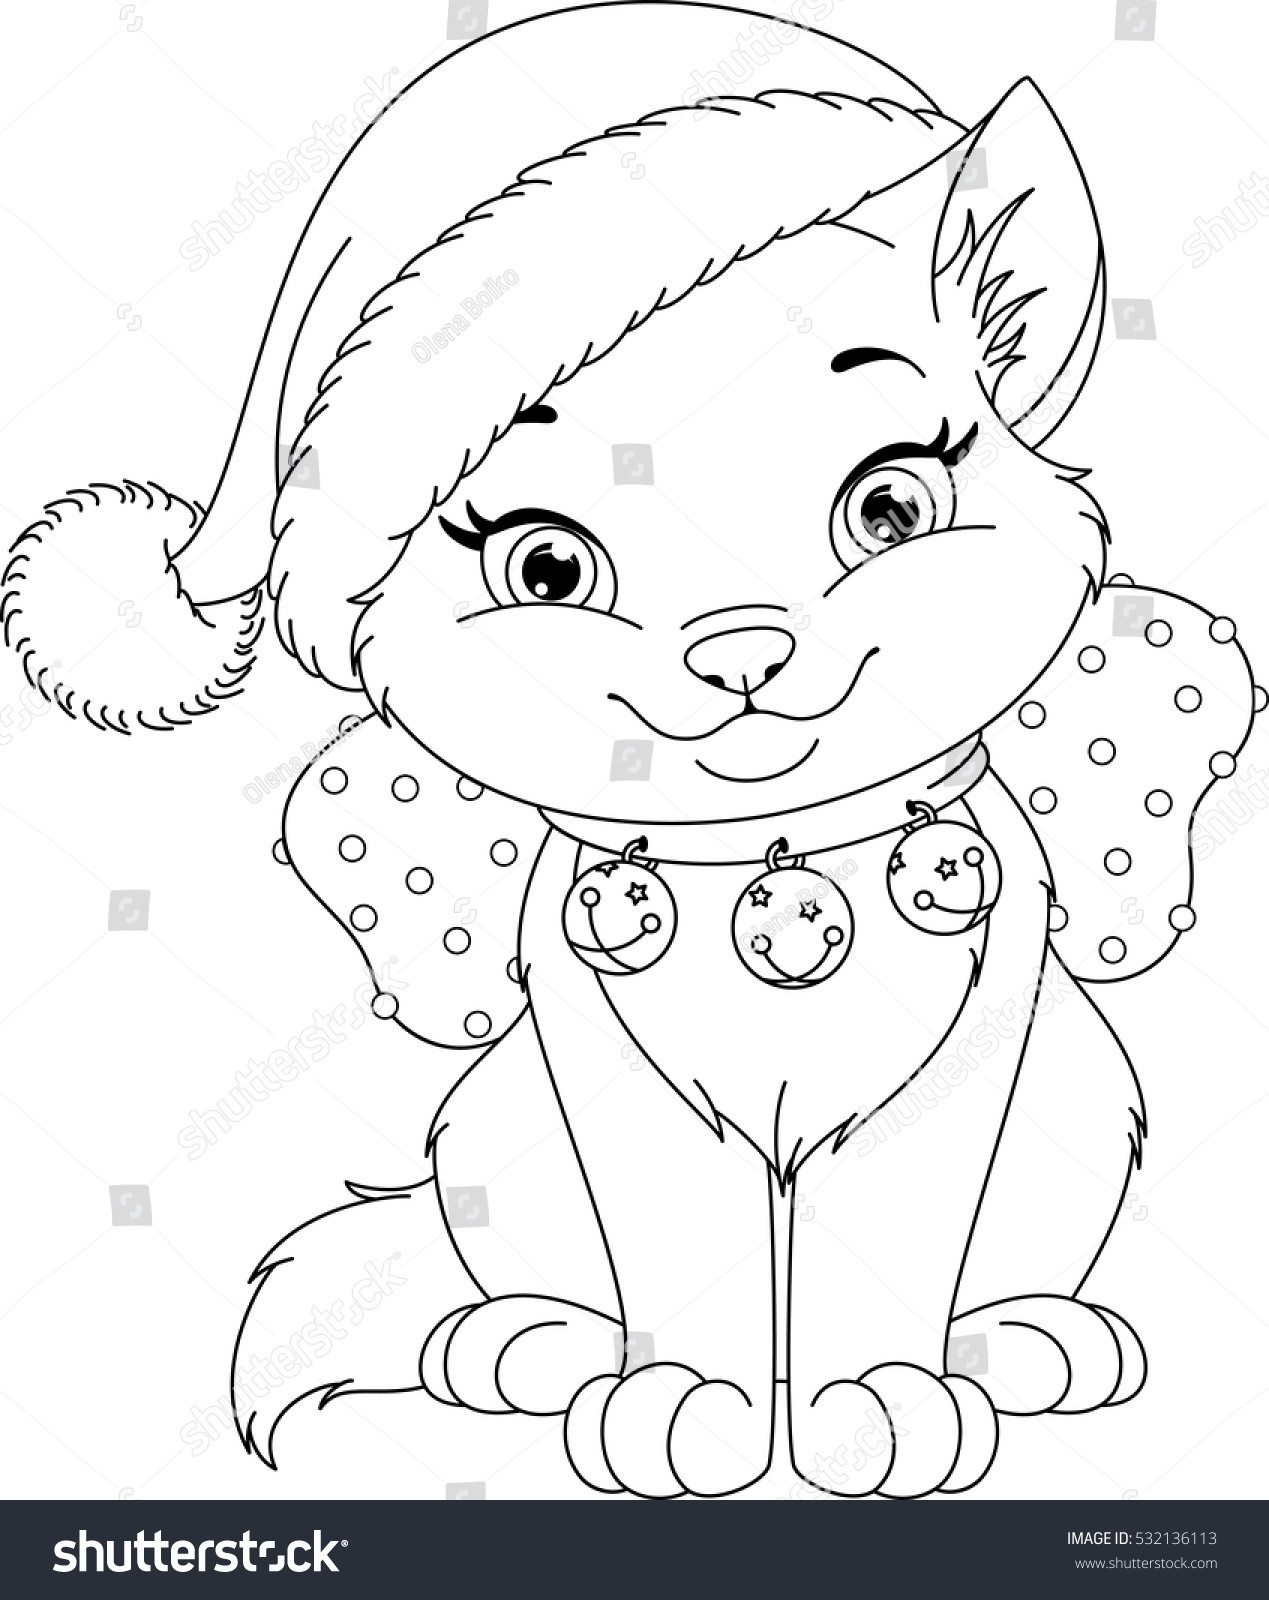 Christmas Cat Coloring Page Wallpaper